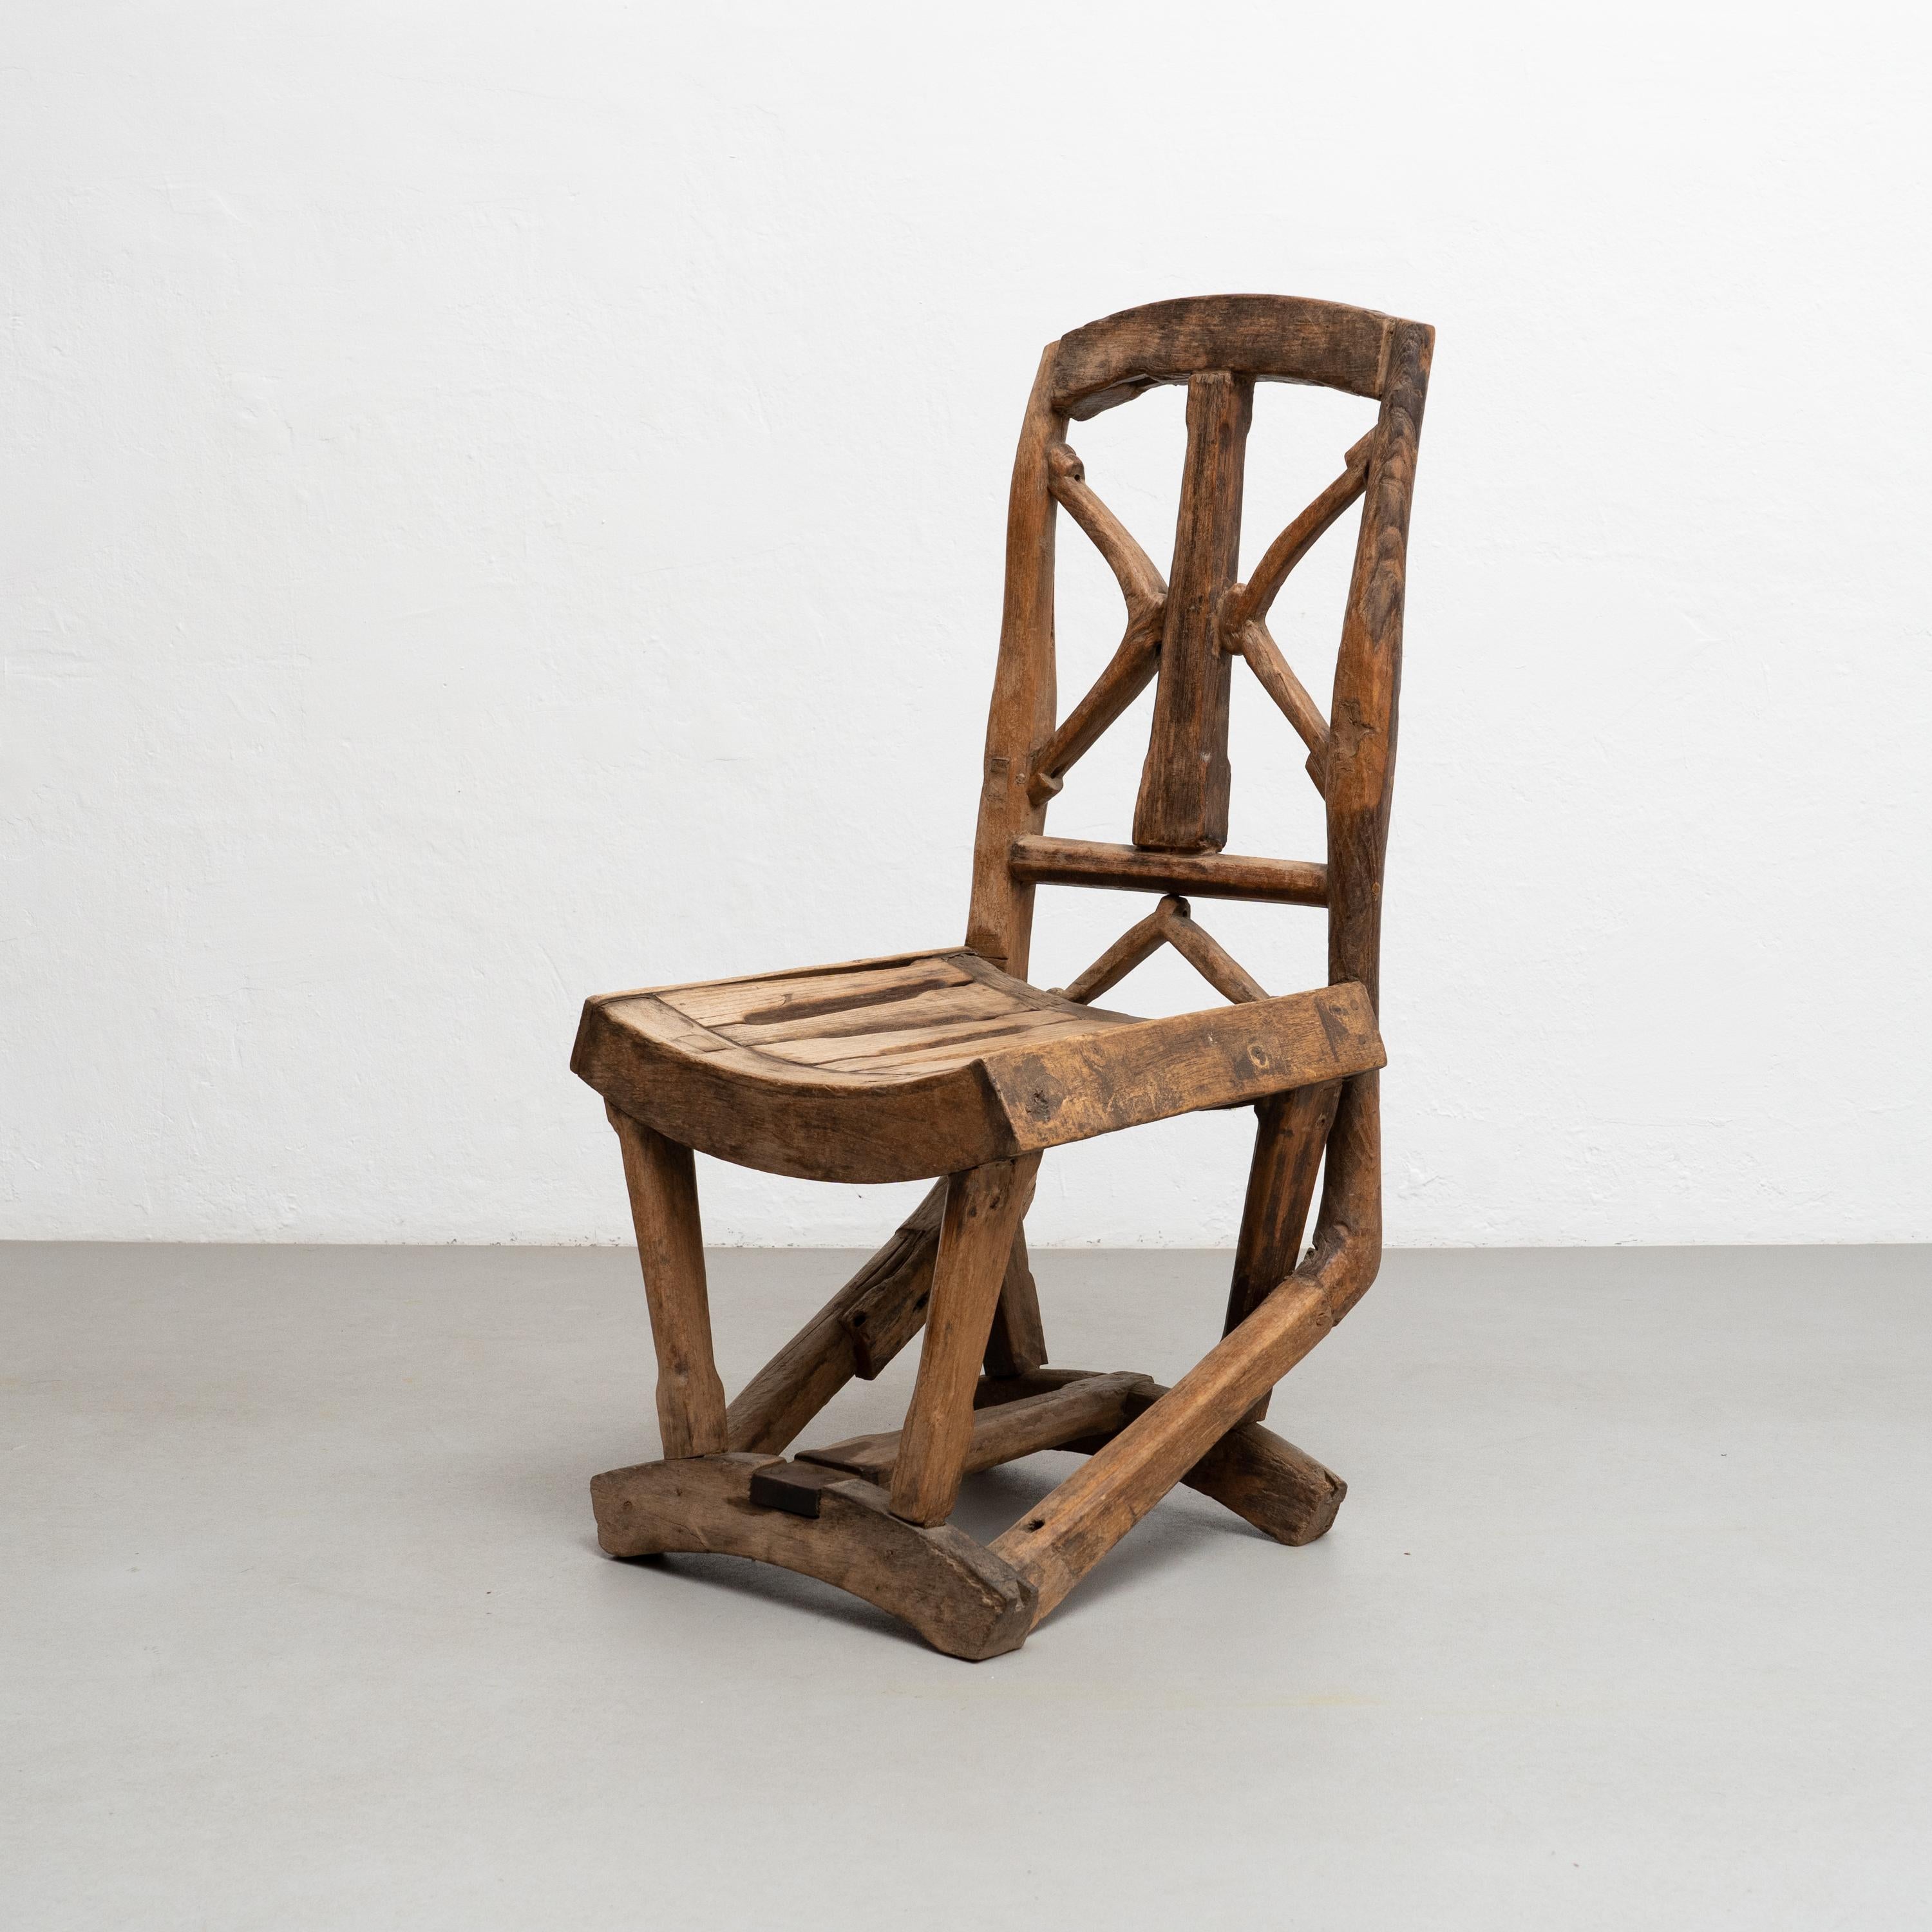 hand-assembled wooden chairs